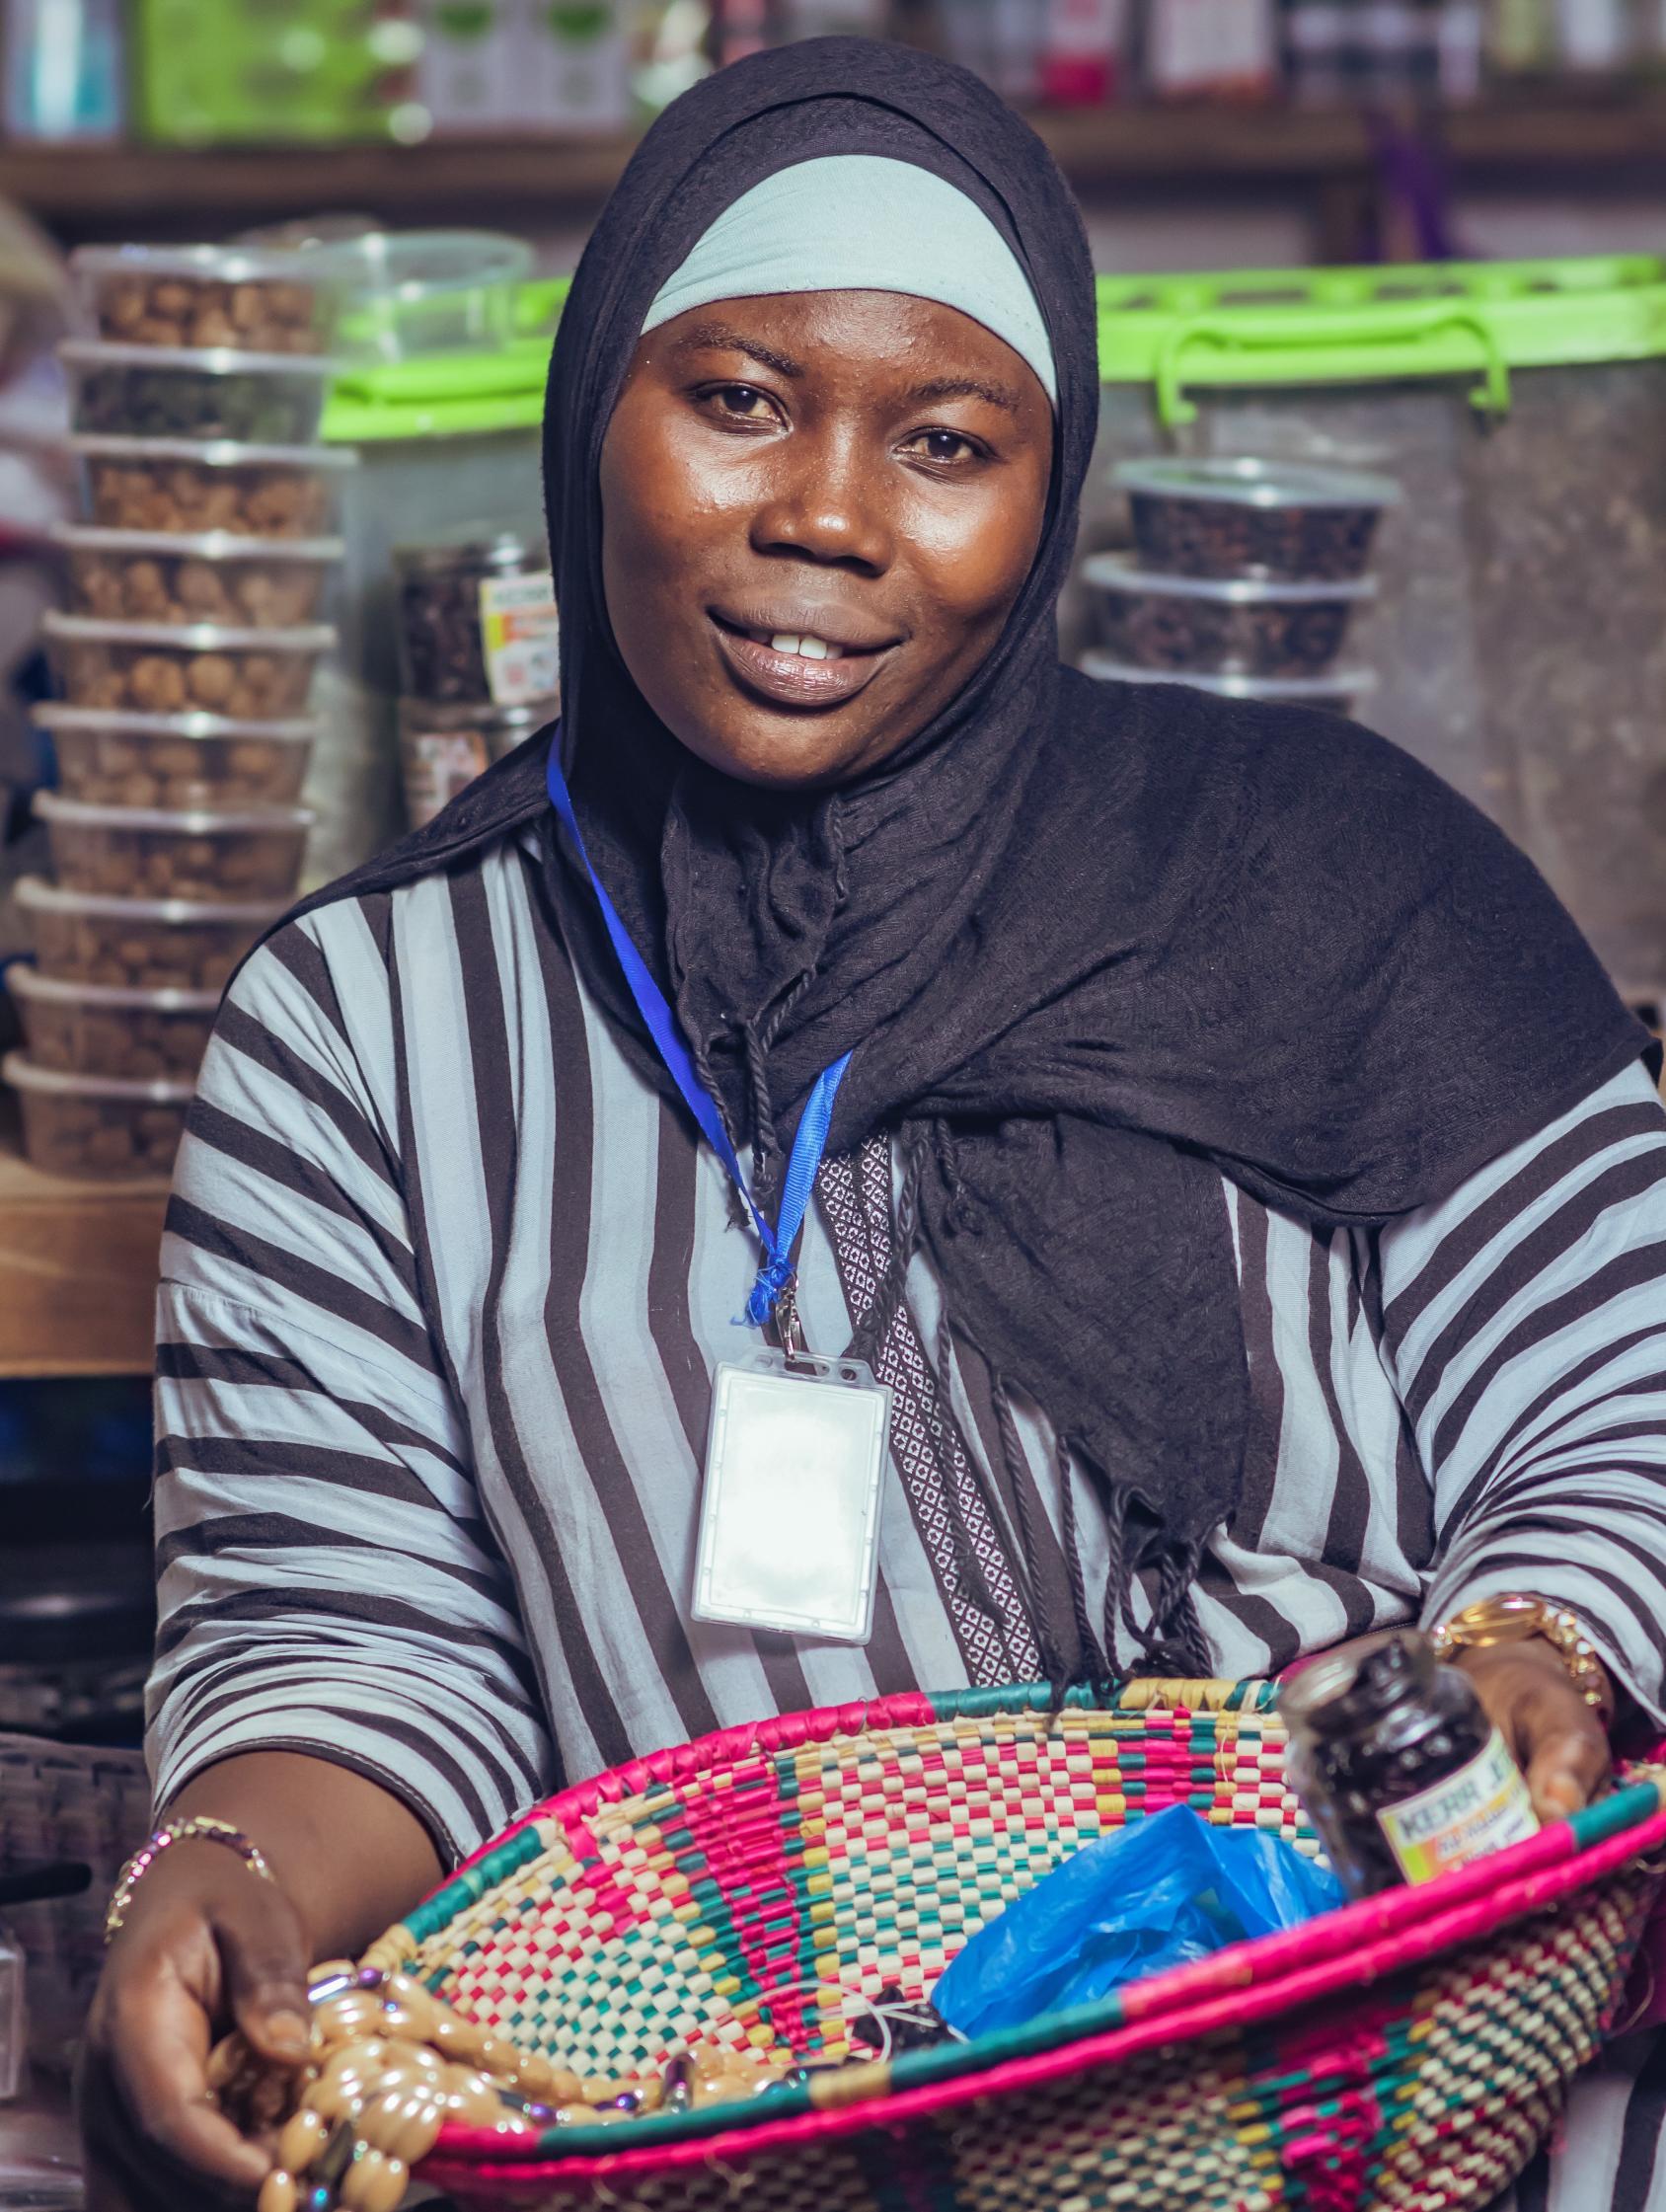 A woman in a black headscarf shows a pink basket